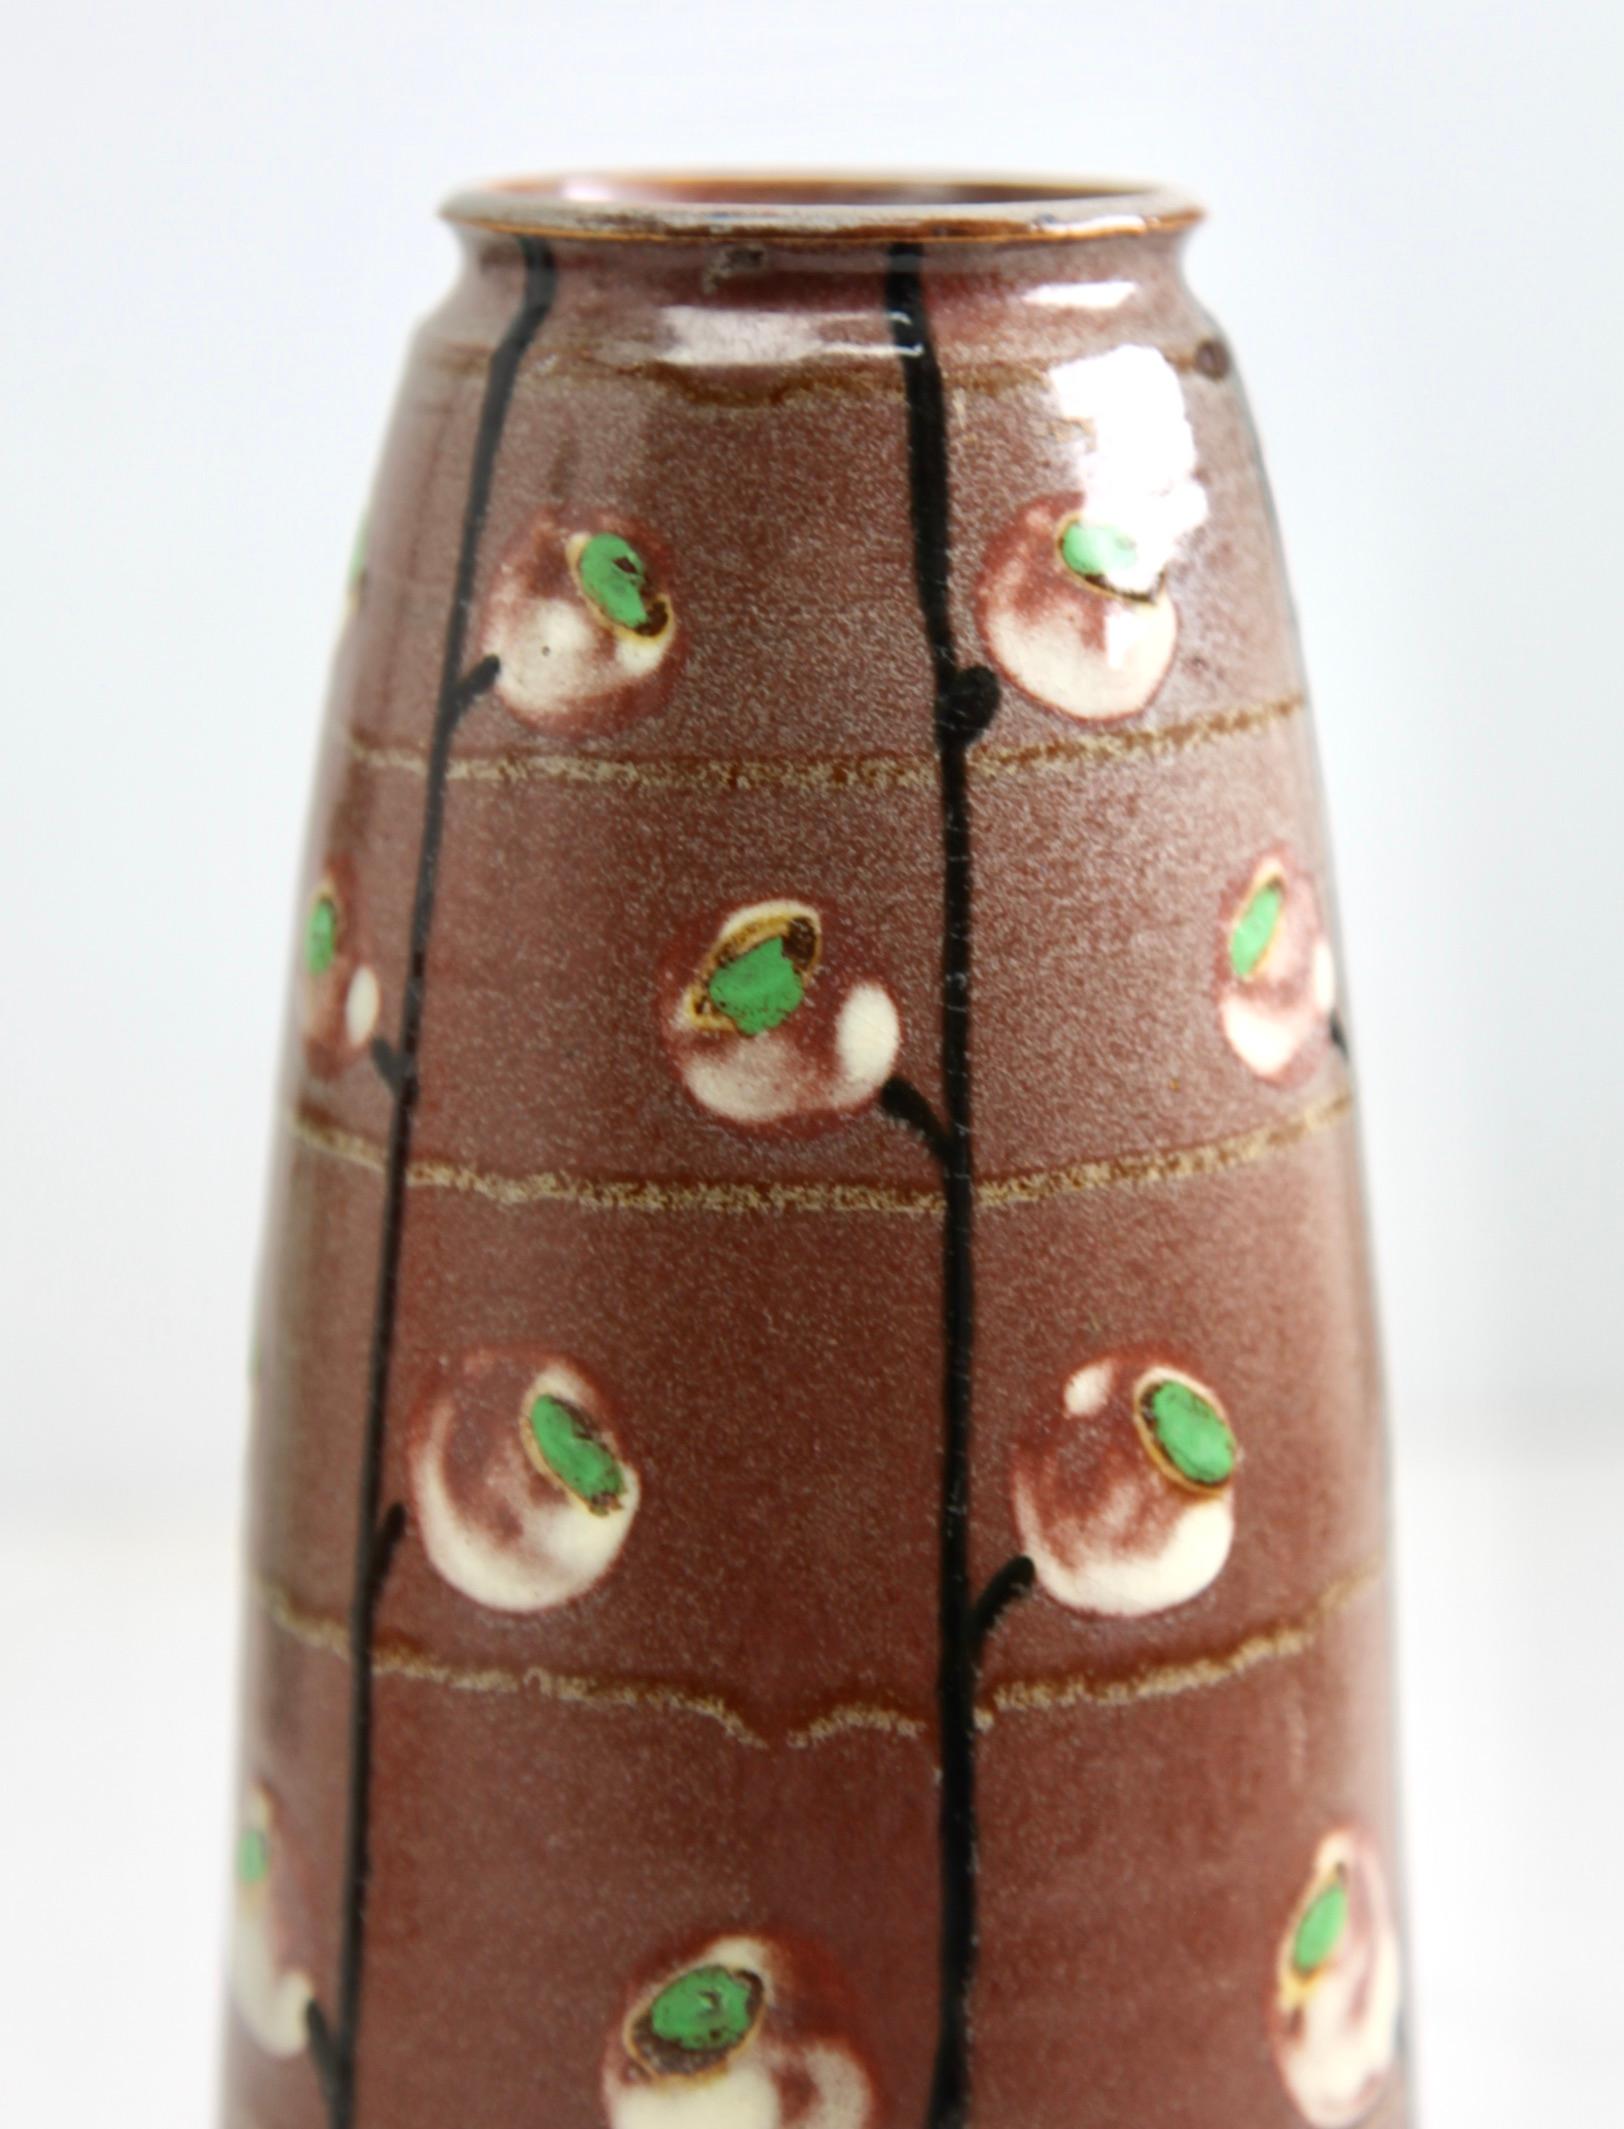 French ceramic vase, Alsace France, circa 1930.
Handcrafted and glazed earthenware with horizontal ribs.
Beautiful glaze in brown and green tints.
Perfect condition.

We specialise in Art Nouveau, Art Deco and Vintage